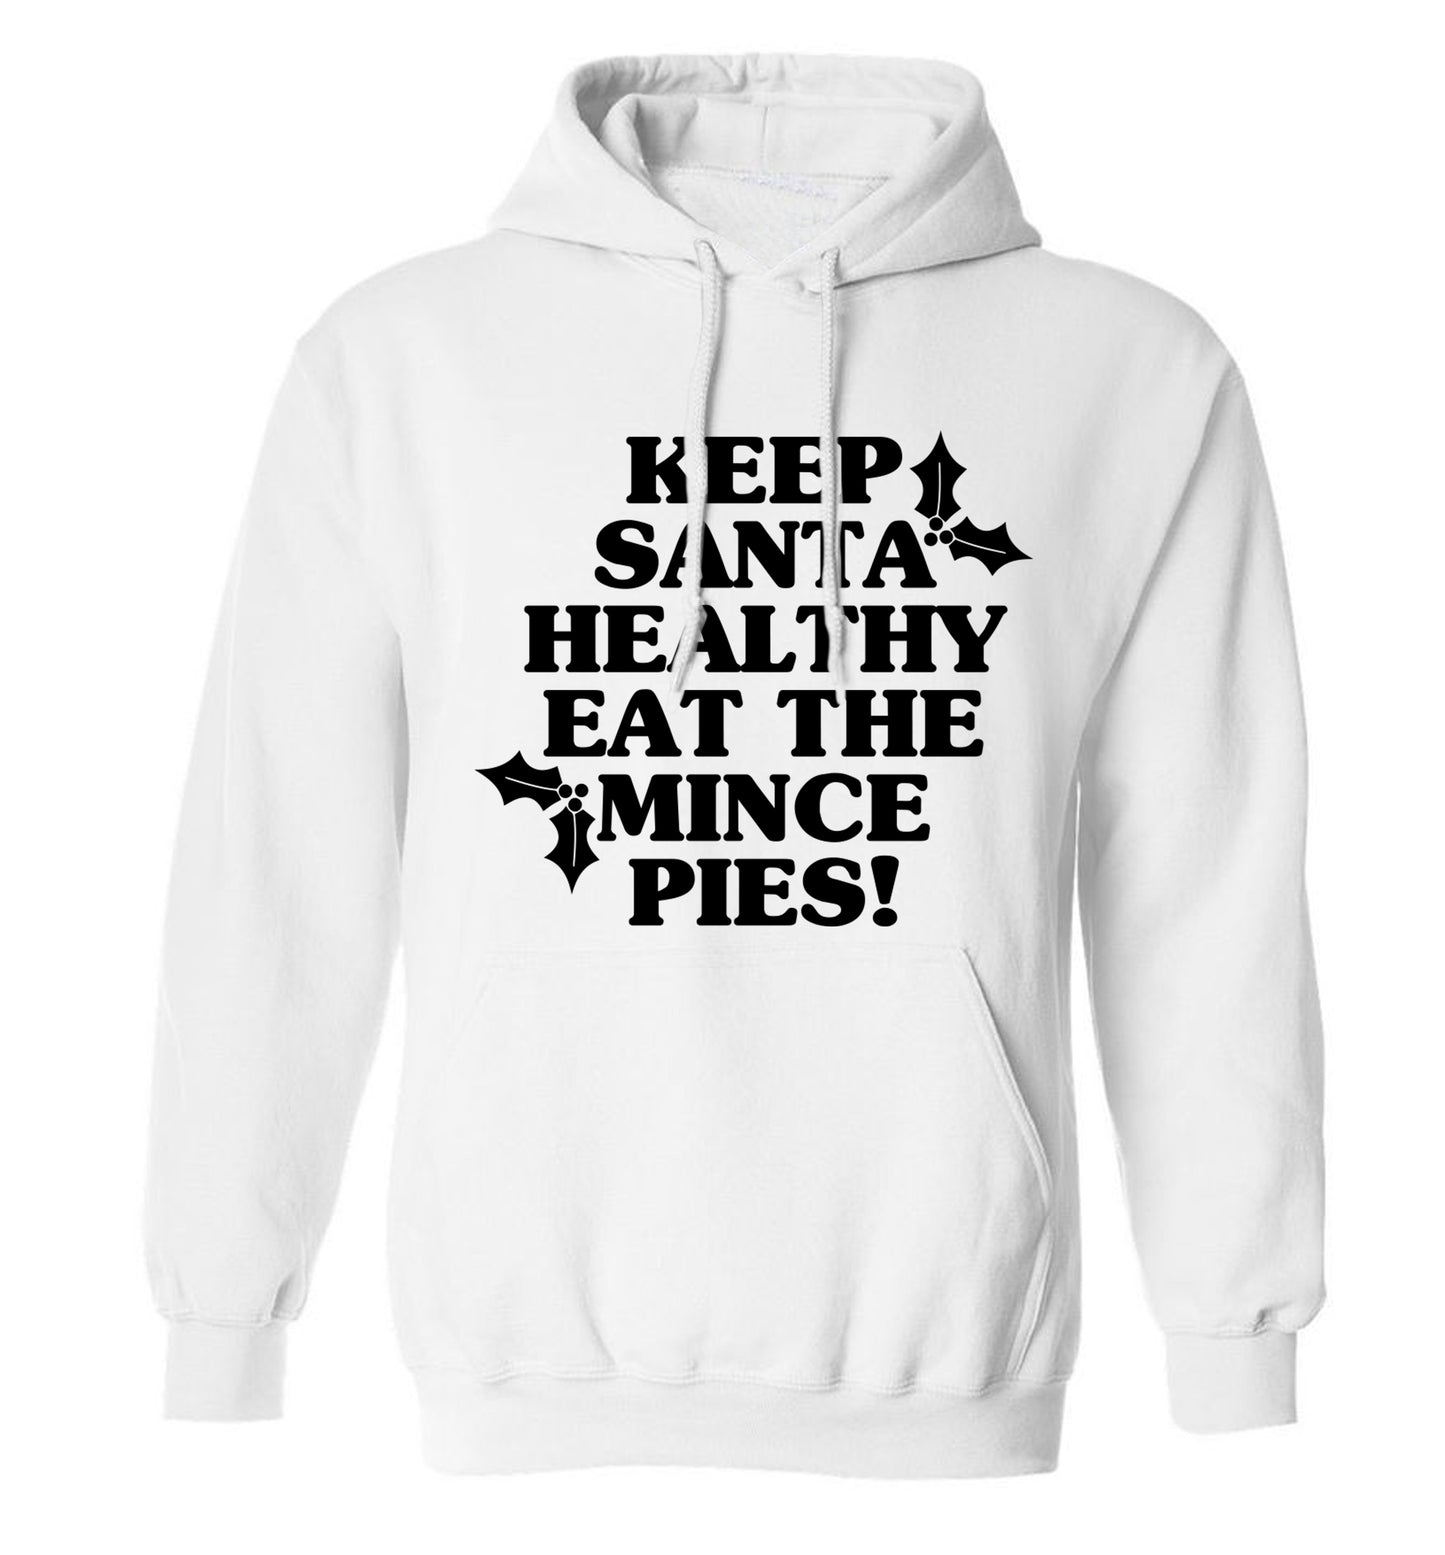 Keep santa healthy eat the mince pies adults unisex white hoodie 2XL